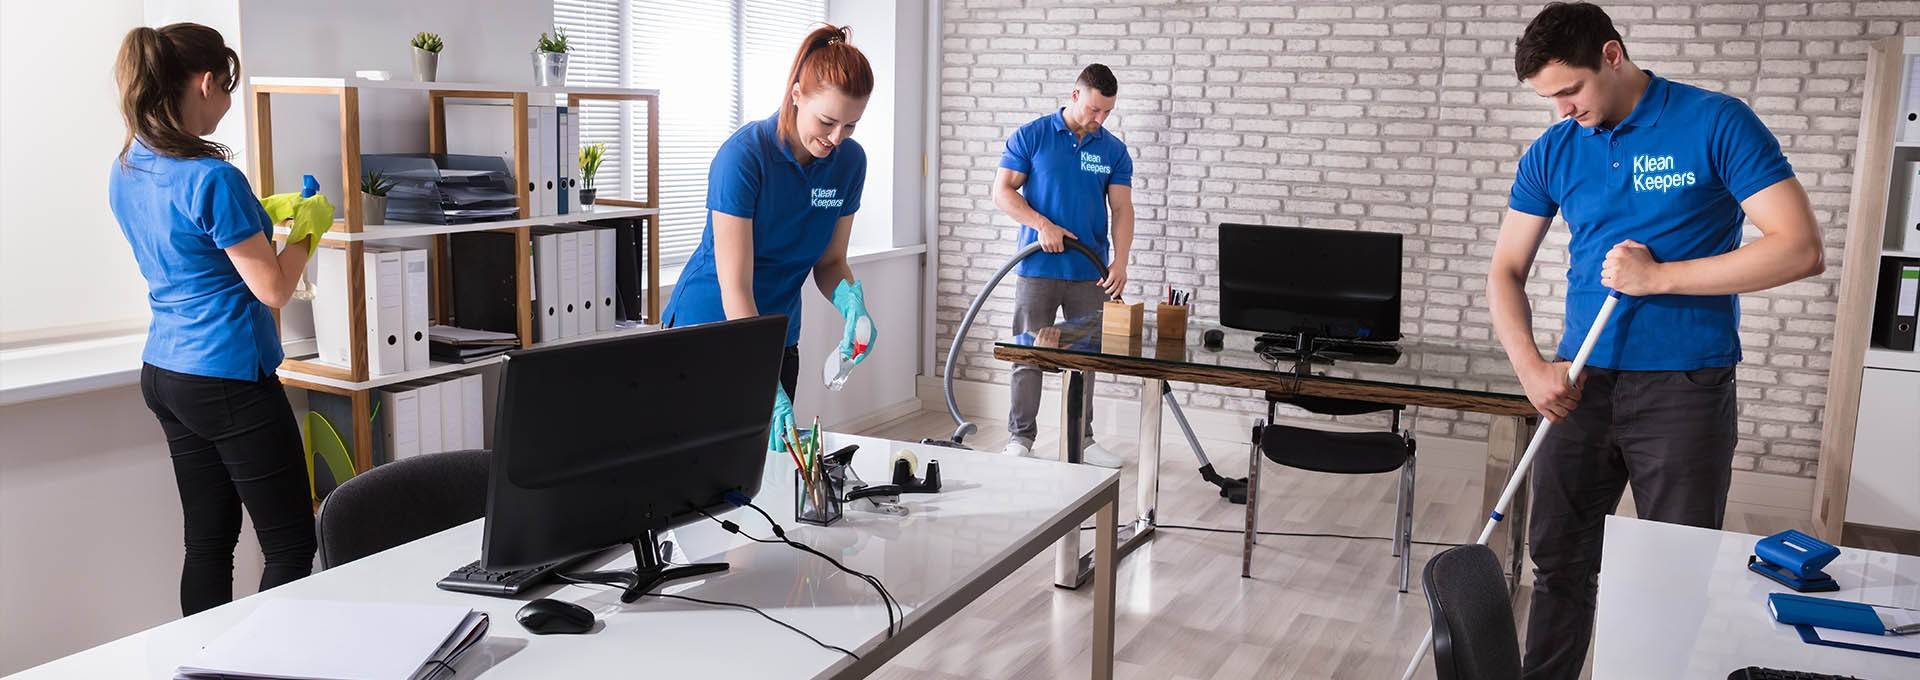 Commercial Cleaning Services in London - Klean Keepers